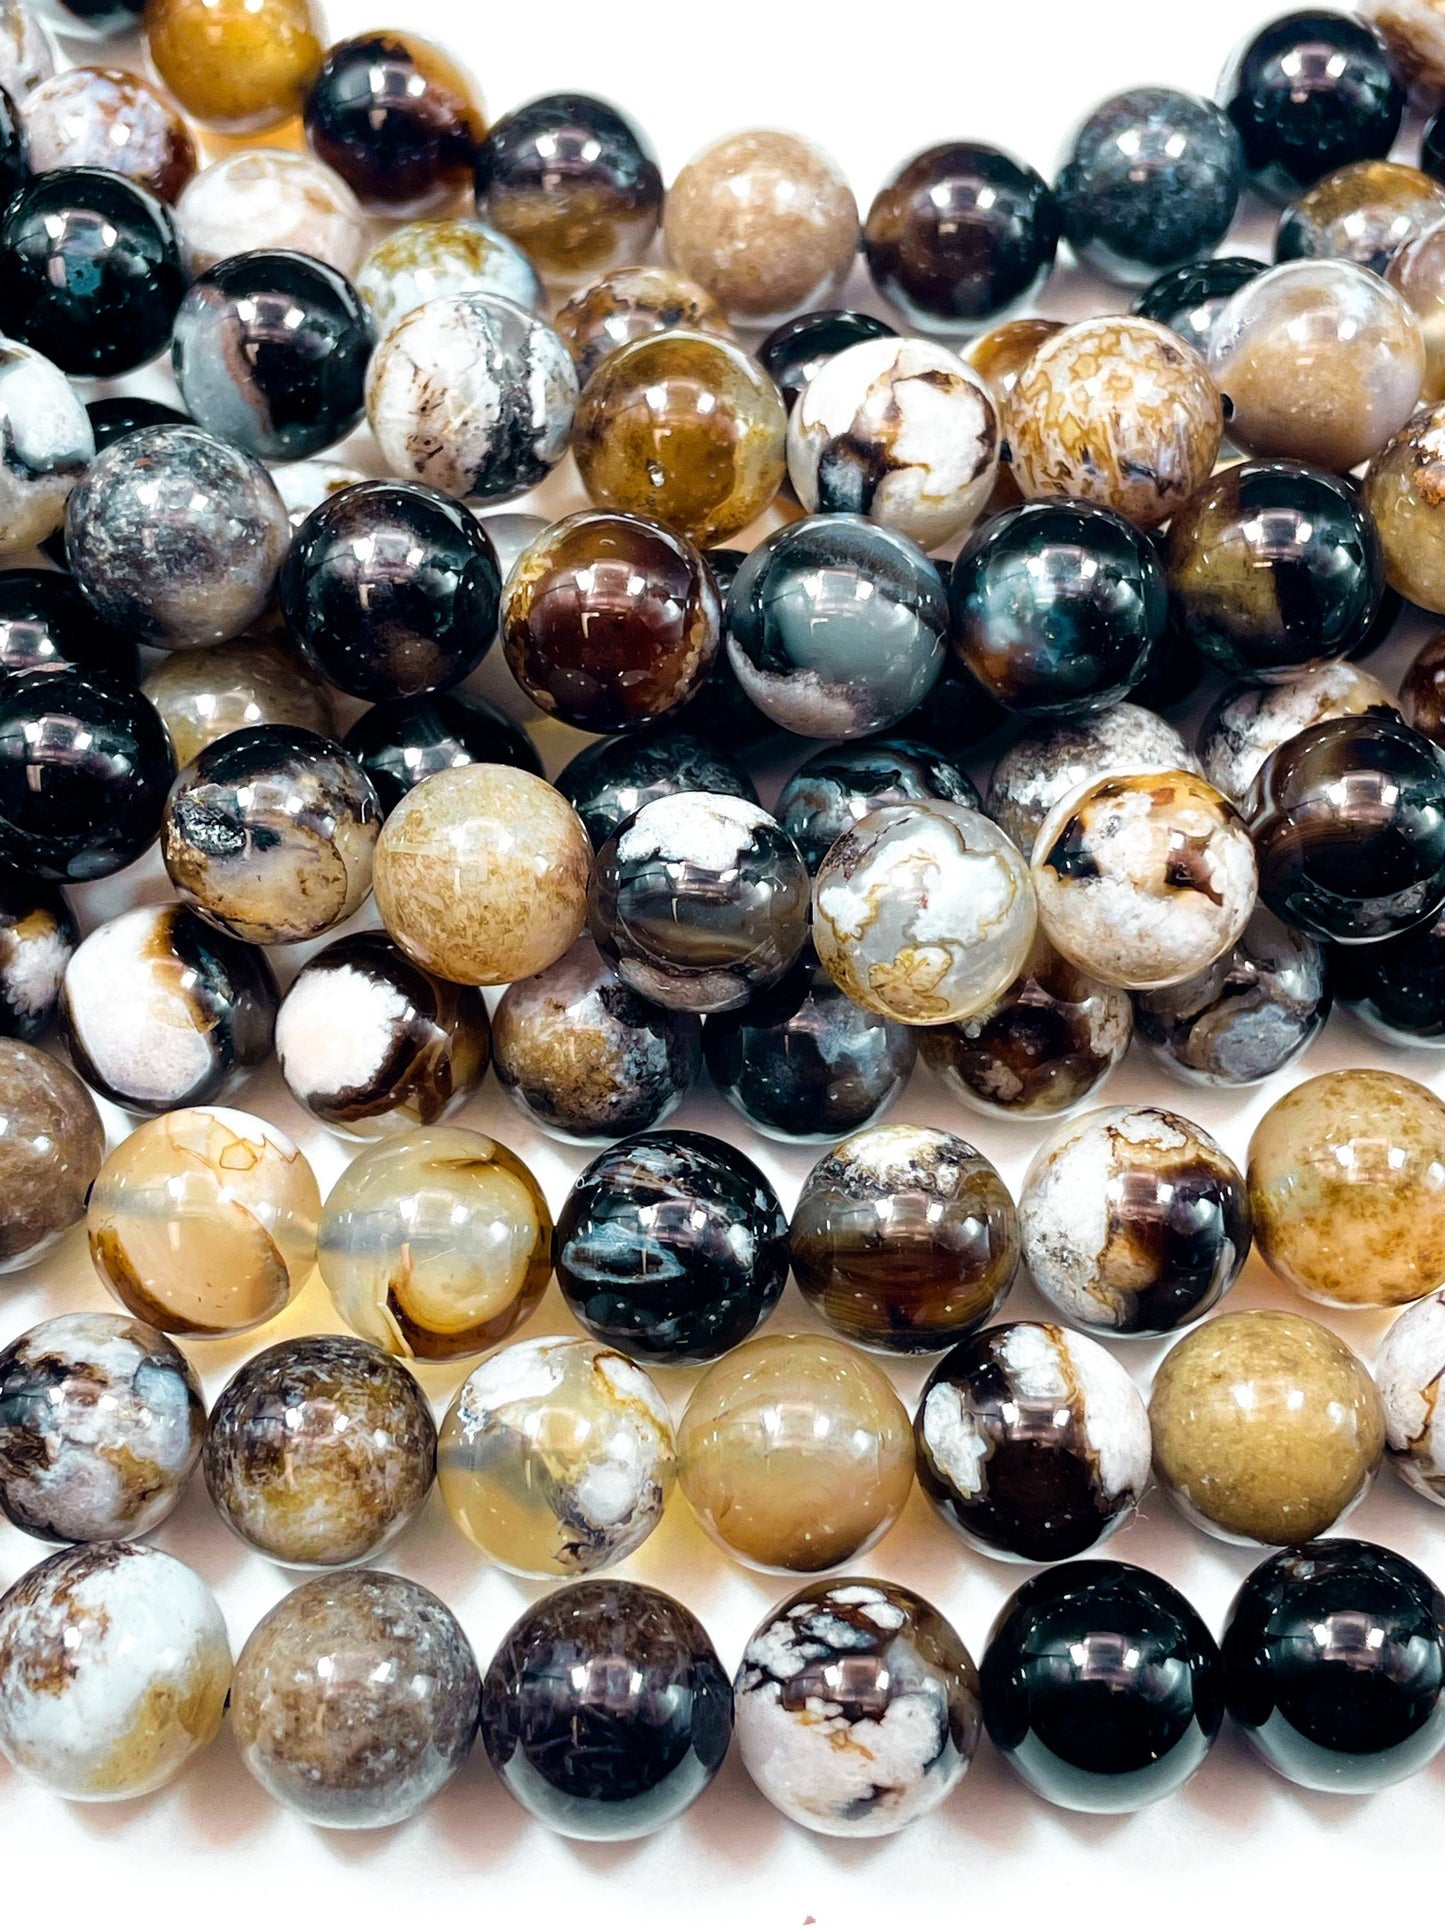 Natural Black Cherry Blossom Flower Agate Gemstone Beads 6mm 8mm 10mm 12mm Round Beads, Gorgeous Black Brown Color Blossom Flower Agate Beads